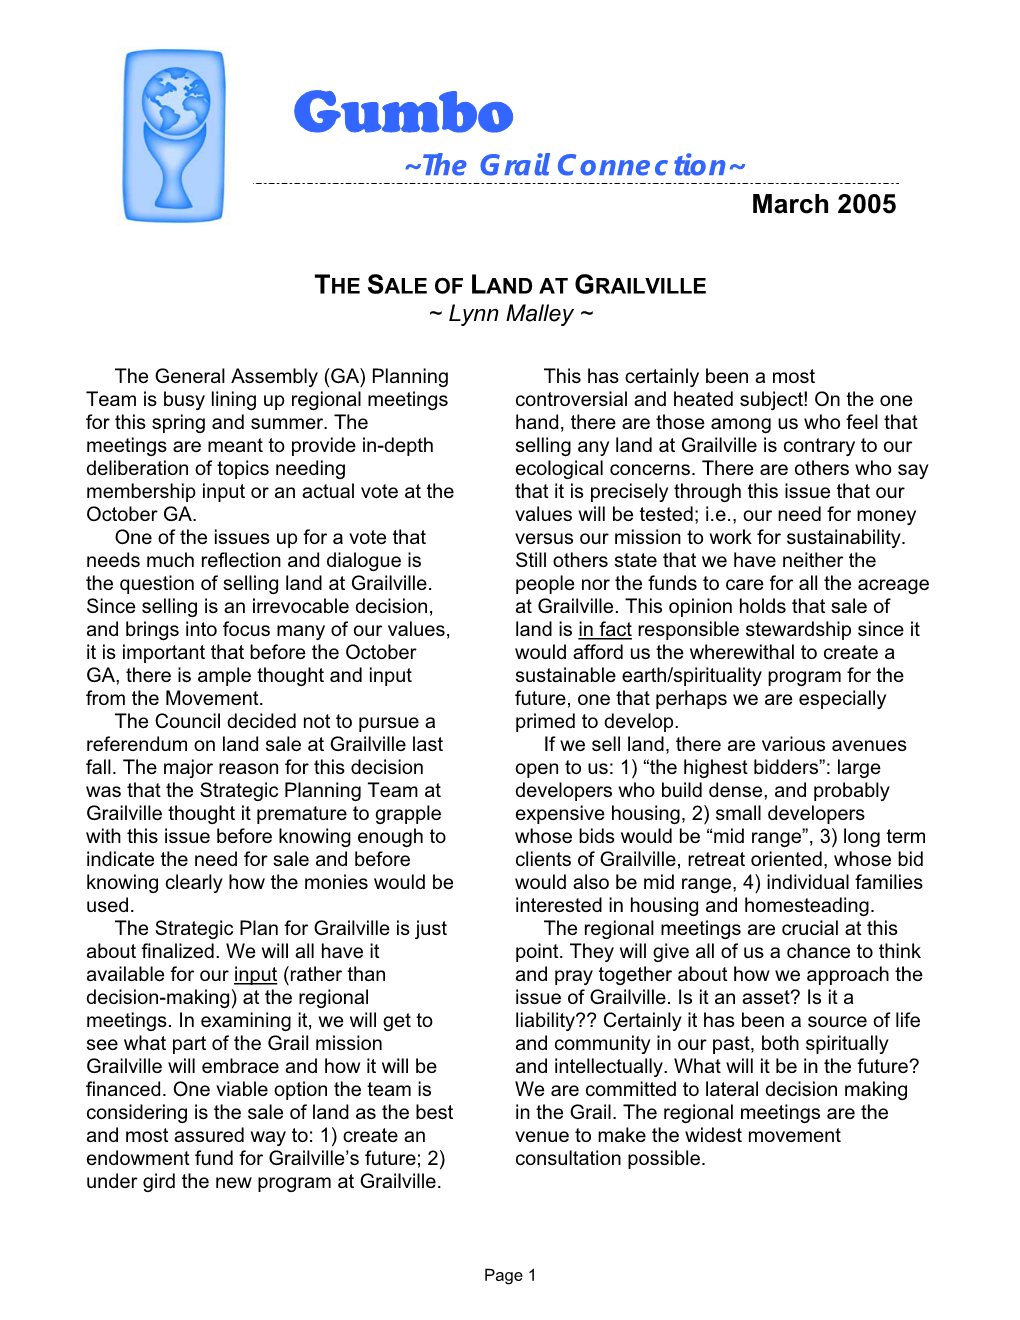 Grail Retreat Article for Gumbo, the Grail Connection 5/4/04